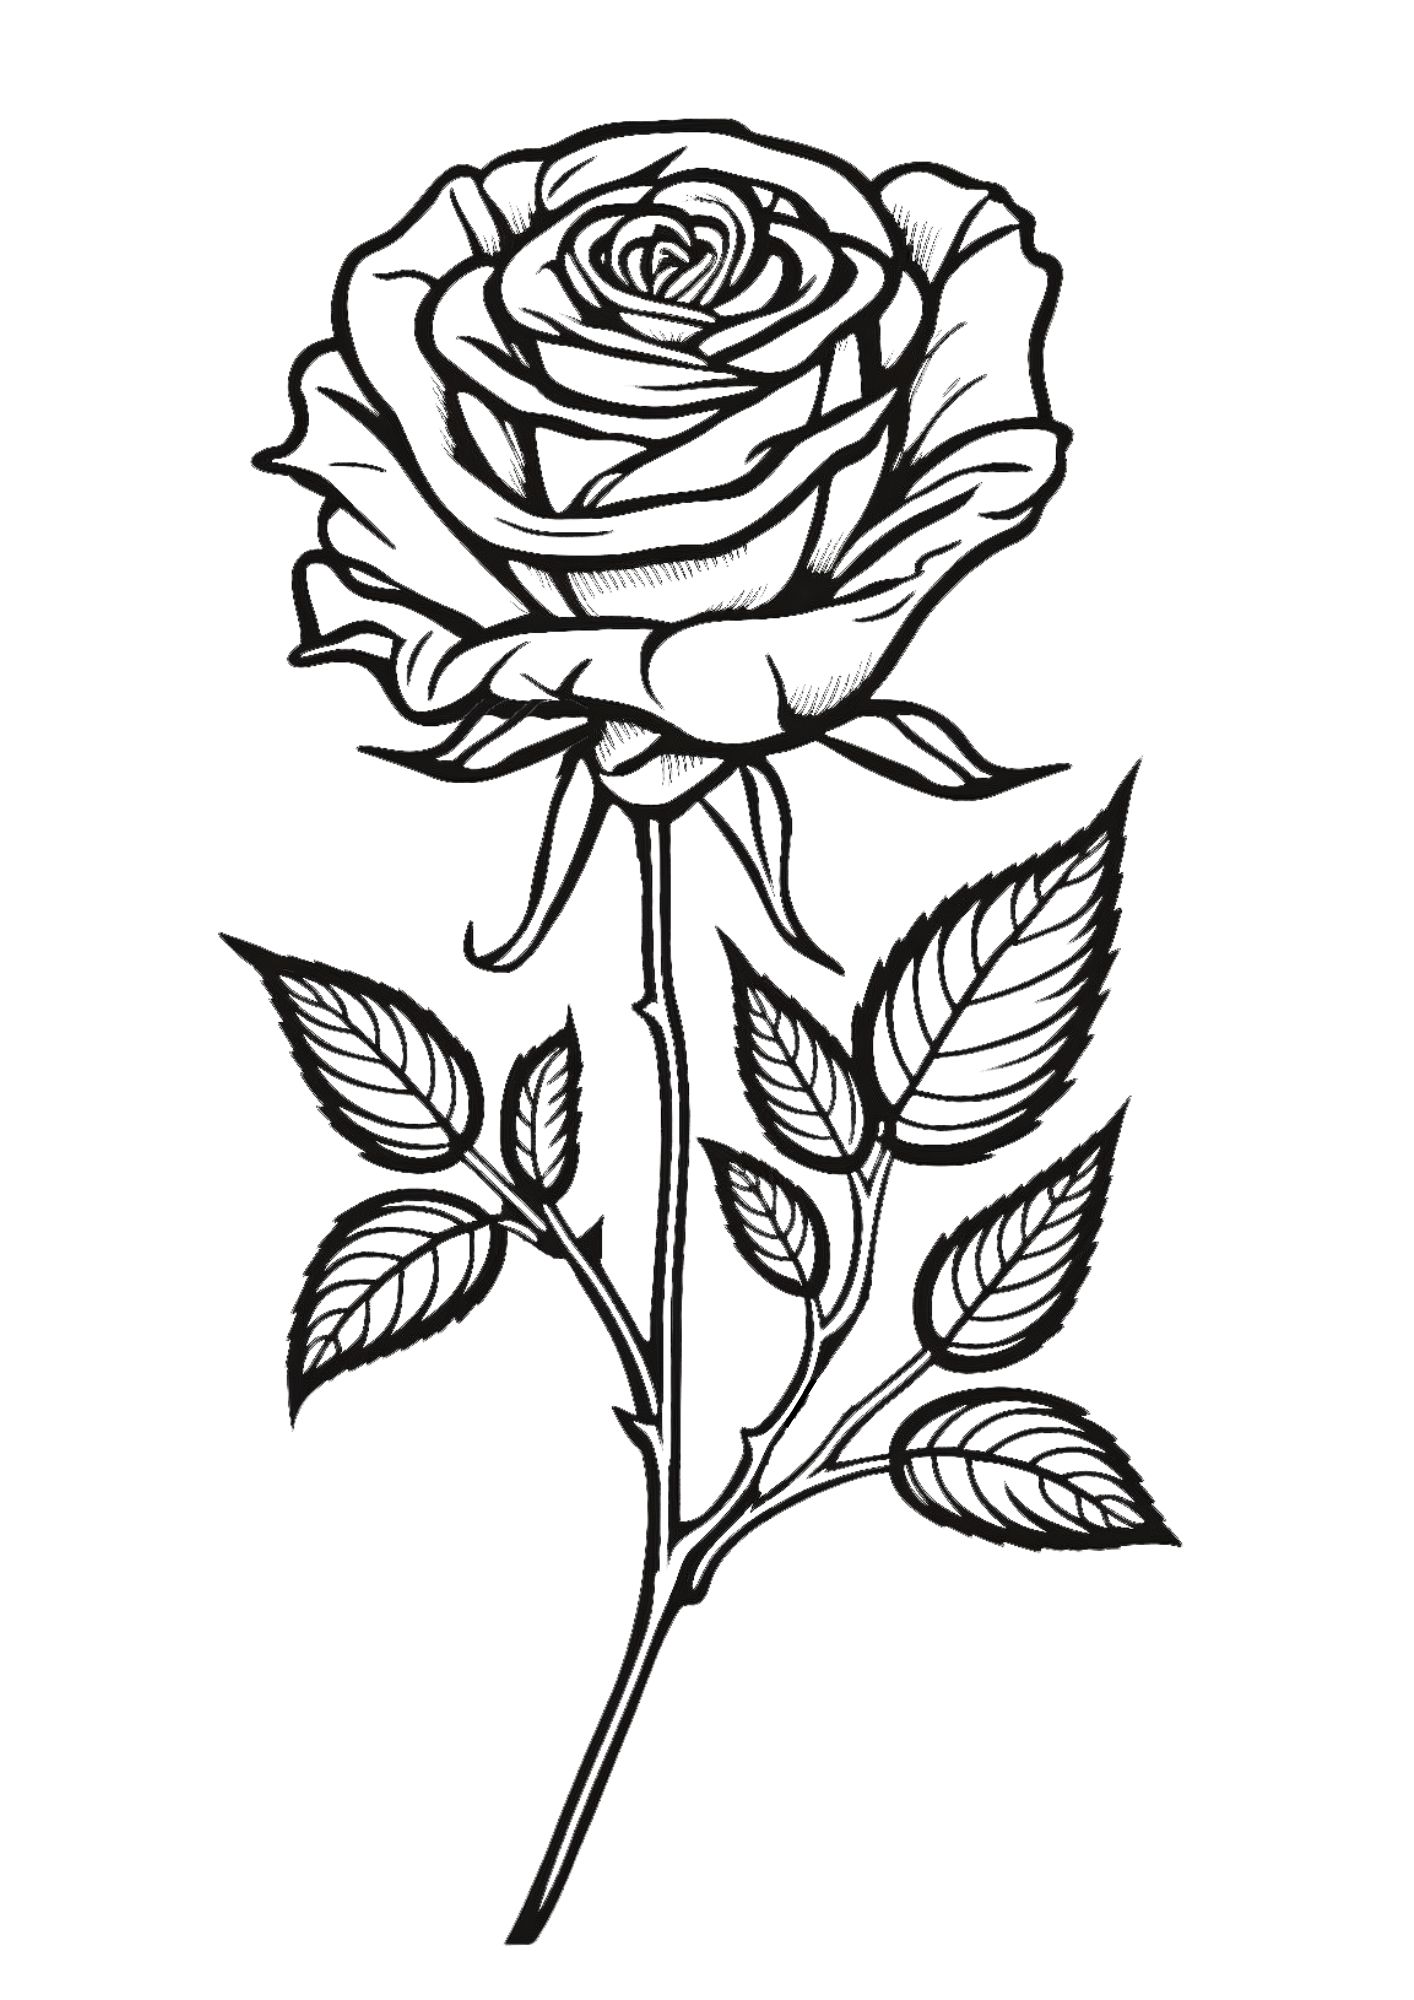 Free Printable Roses Coloring Pages for Adults and Kids - Coloring Oasis